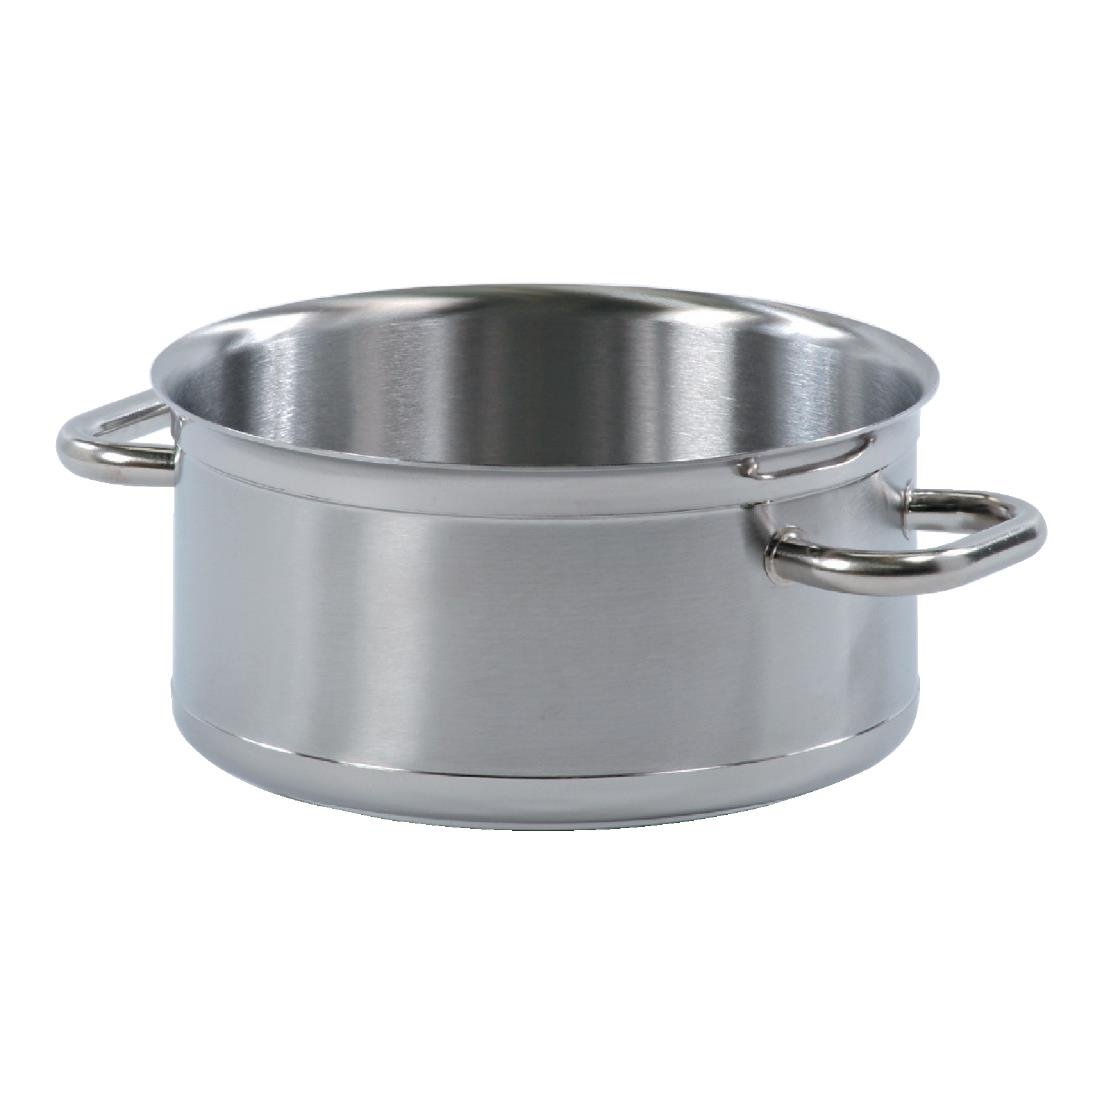 Bourgeat Tradition Plus Casserole Pan 8.6Ltr P270 JD Catering Equipment Solutions Ltd